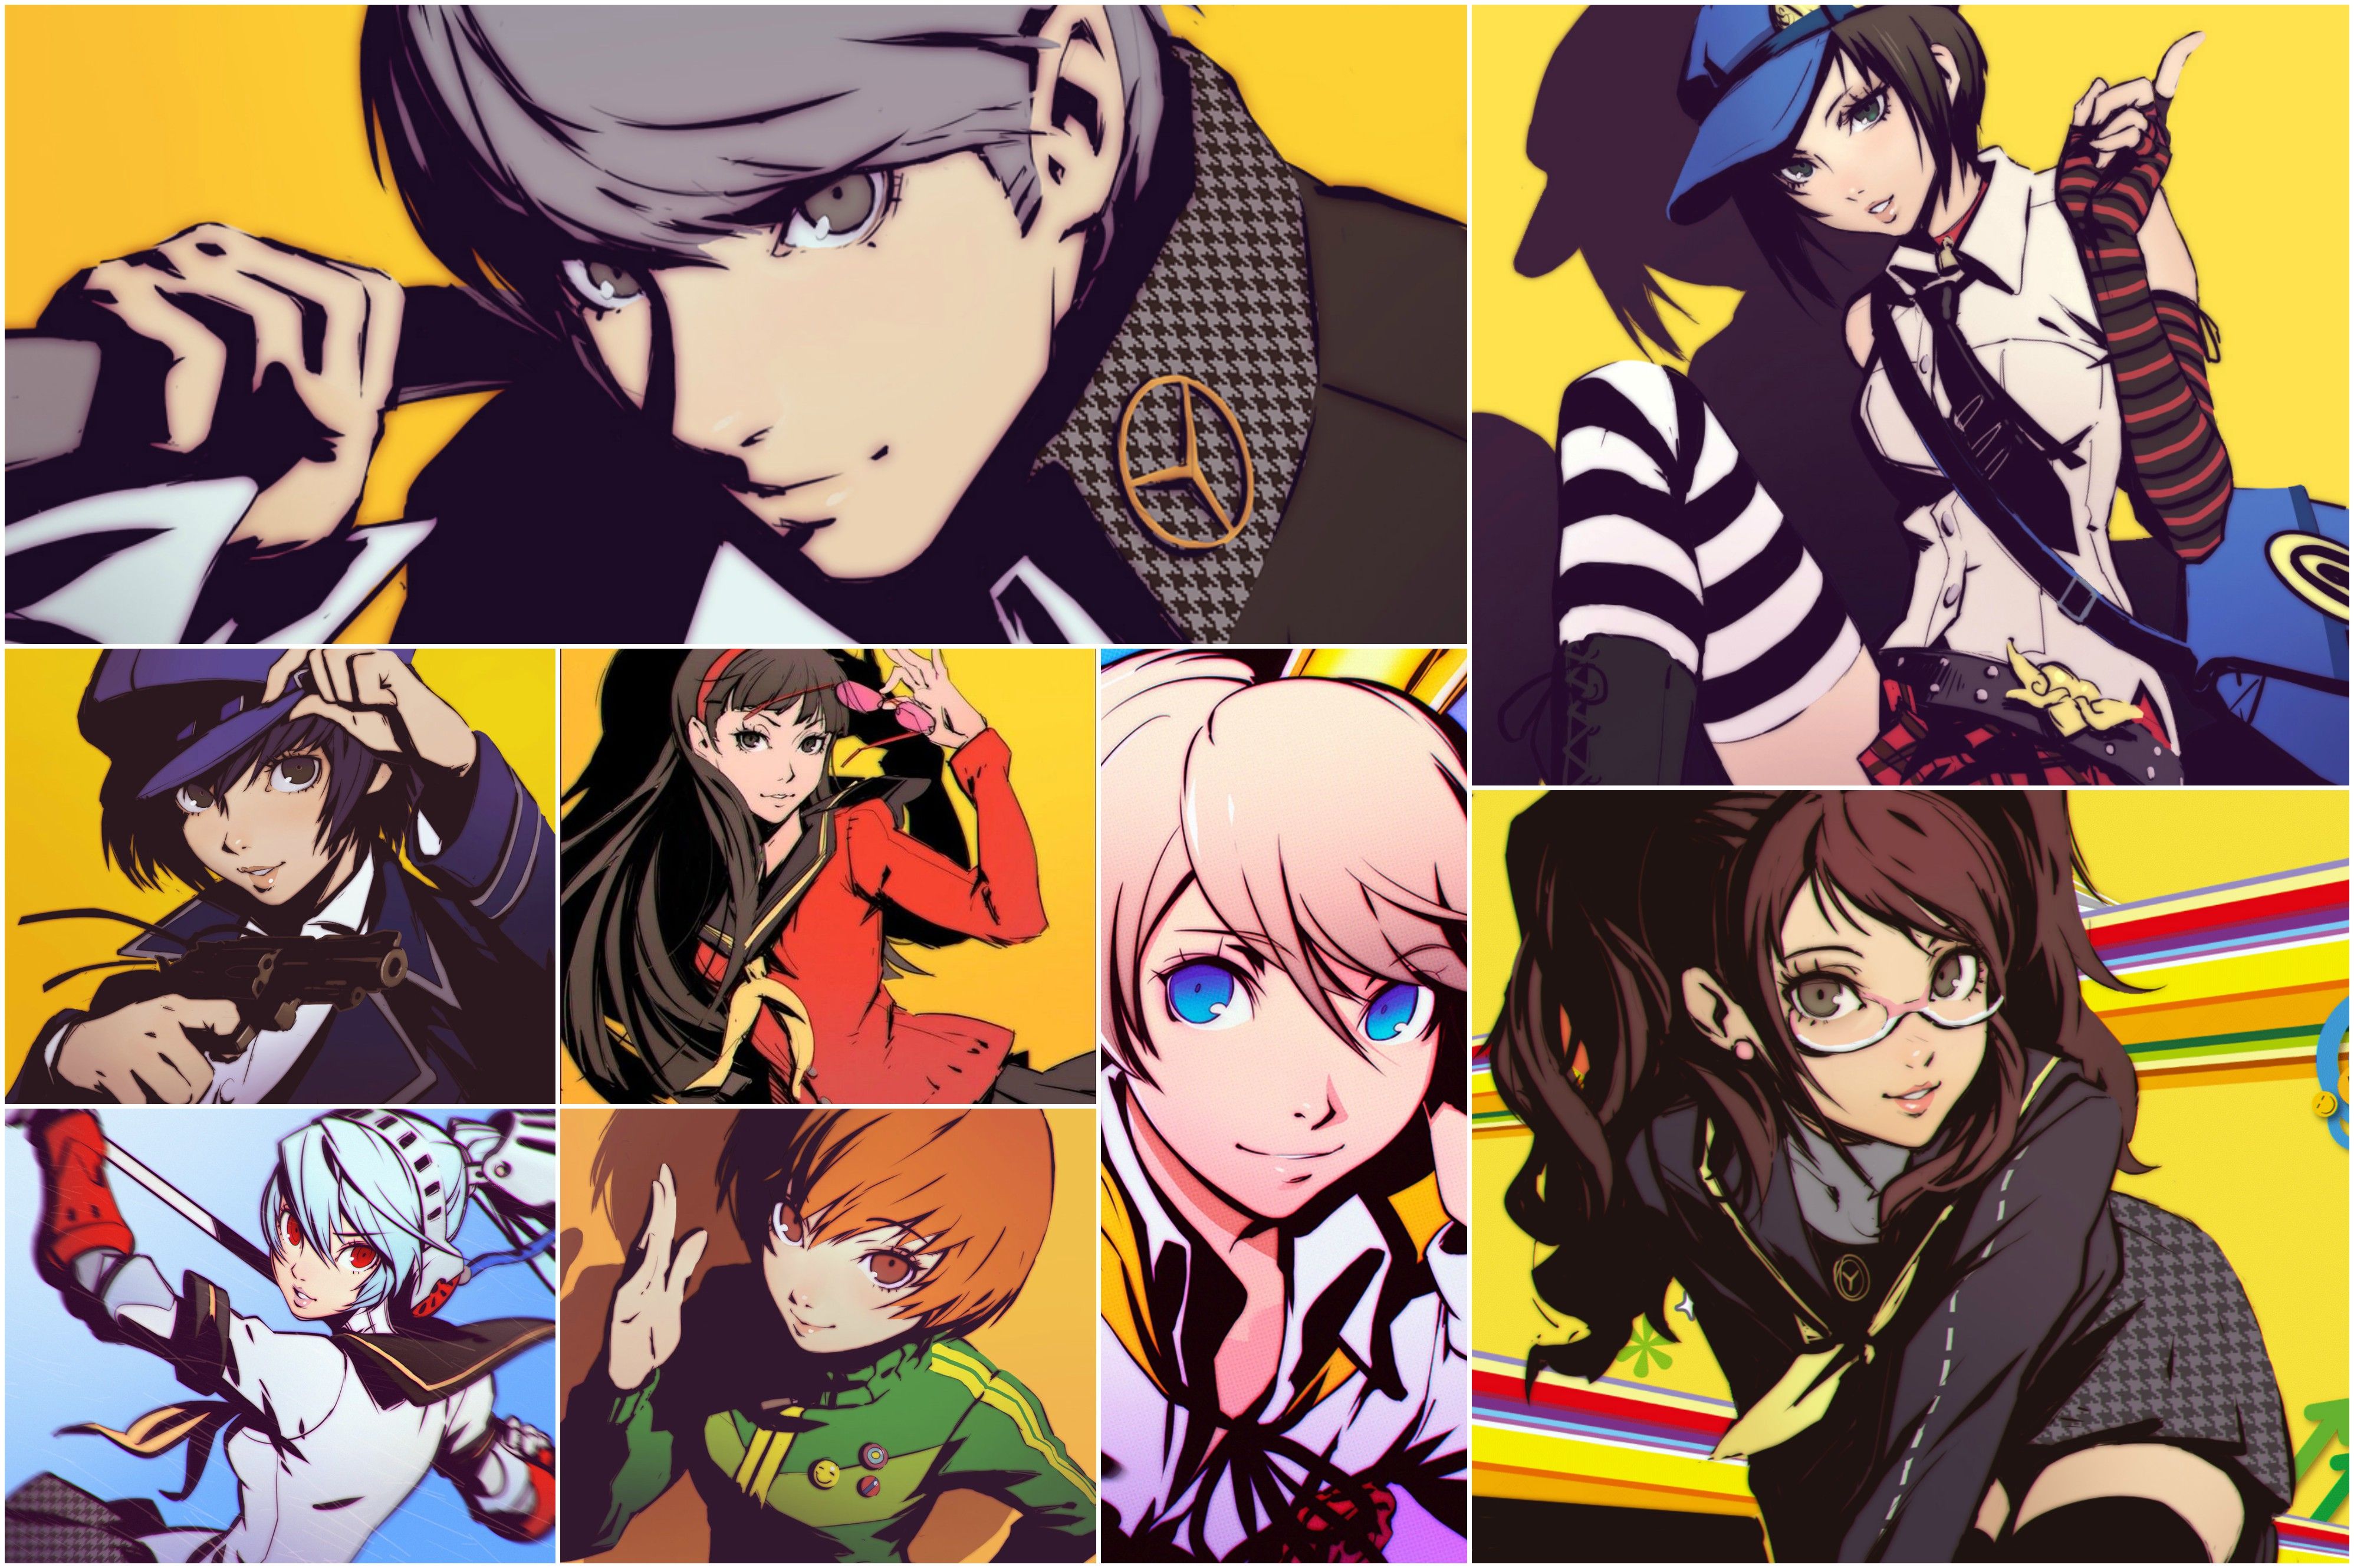 Persona 4 Collage by:AnnieLeeXD 4k Ultra HD Wallpaper. Background